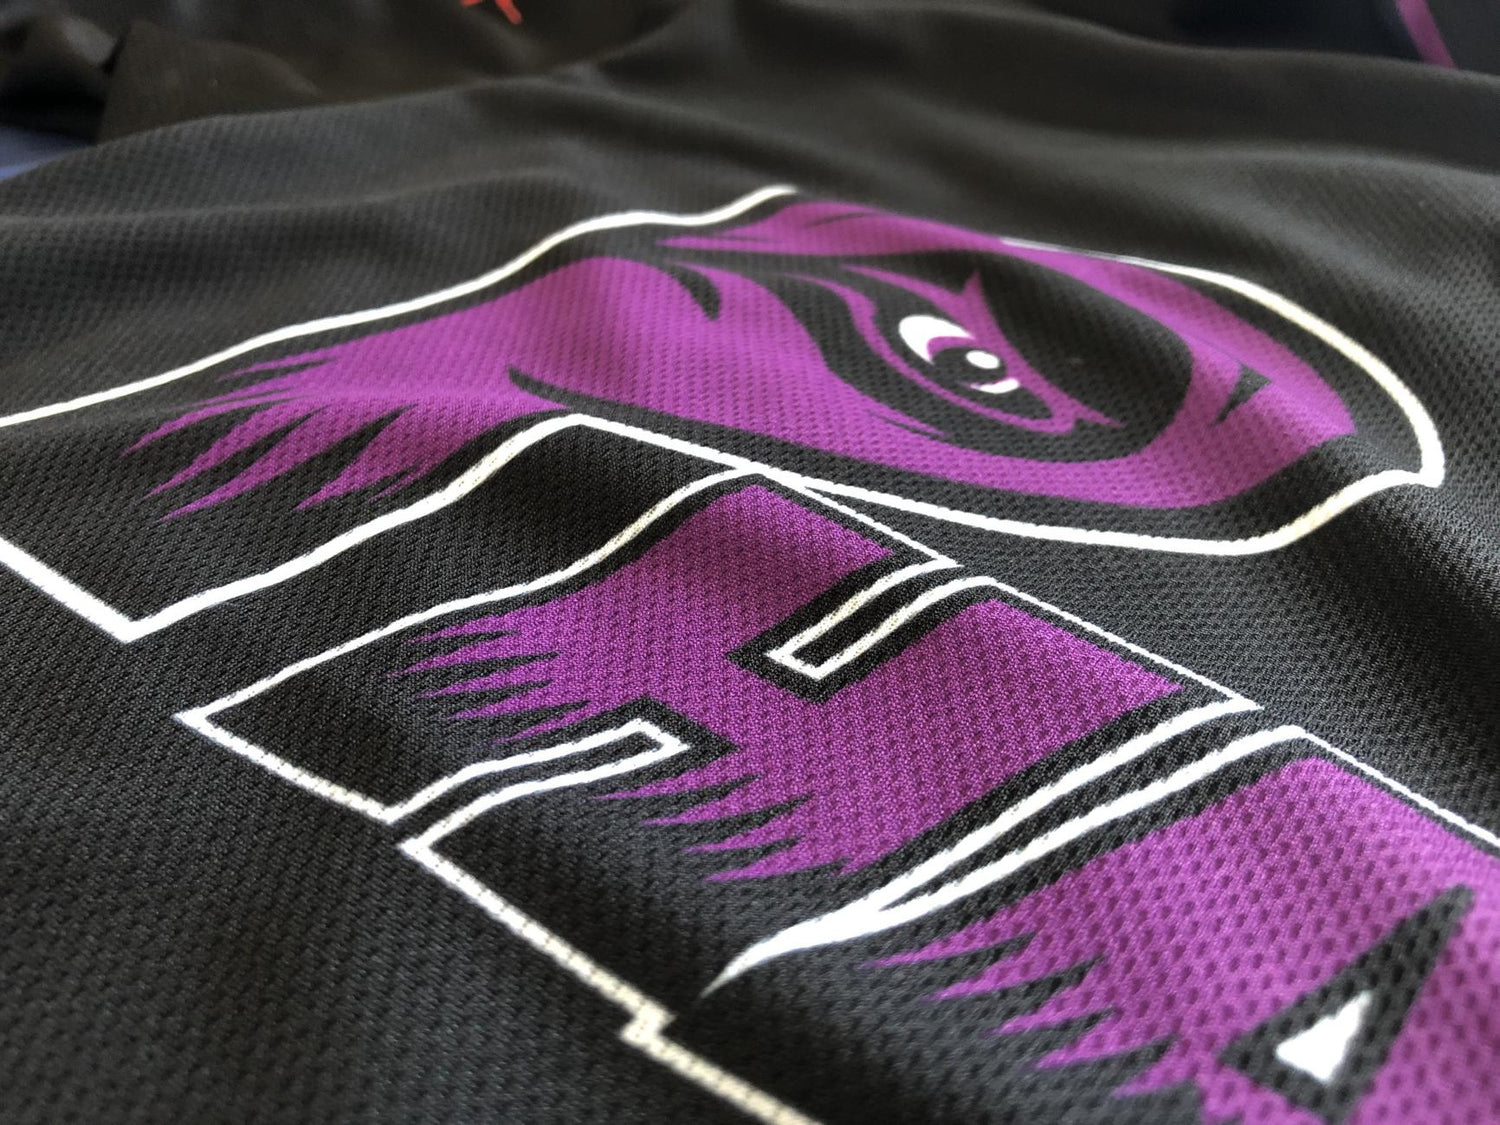 Pro sports' spooky, scary jerseys will send shivers down your spine